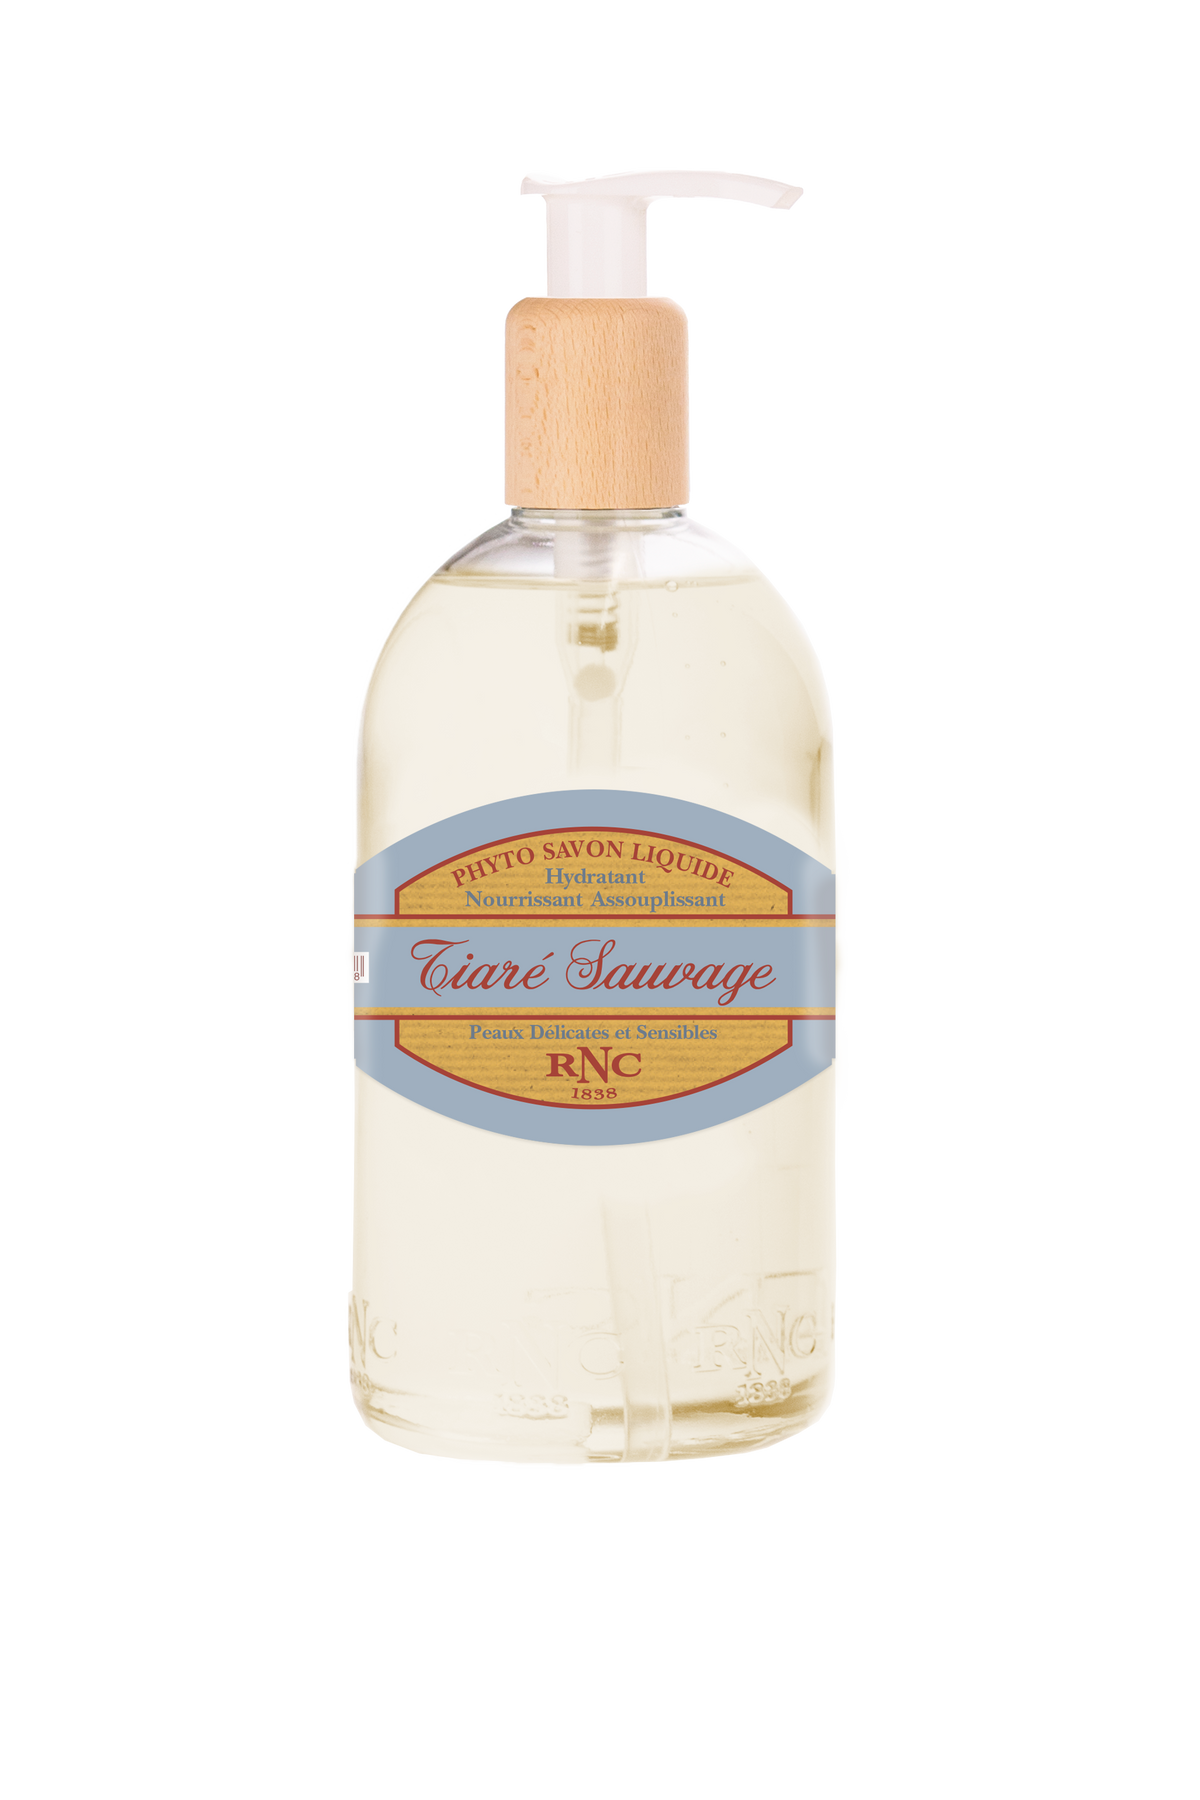 Transparent bottle of Rancé Liquid Soap - Tiare Sauvage (Wild Tiare) with gardenia flower extract, featuring a green pump and a vintage-style label, isolated on a white background.